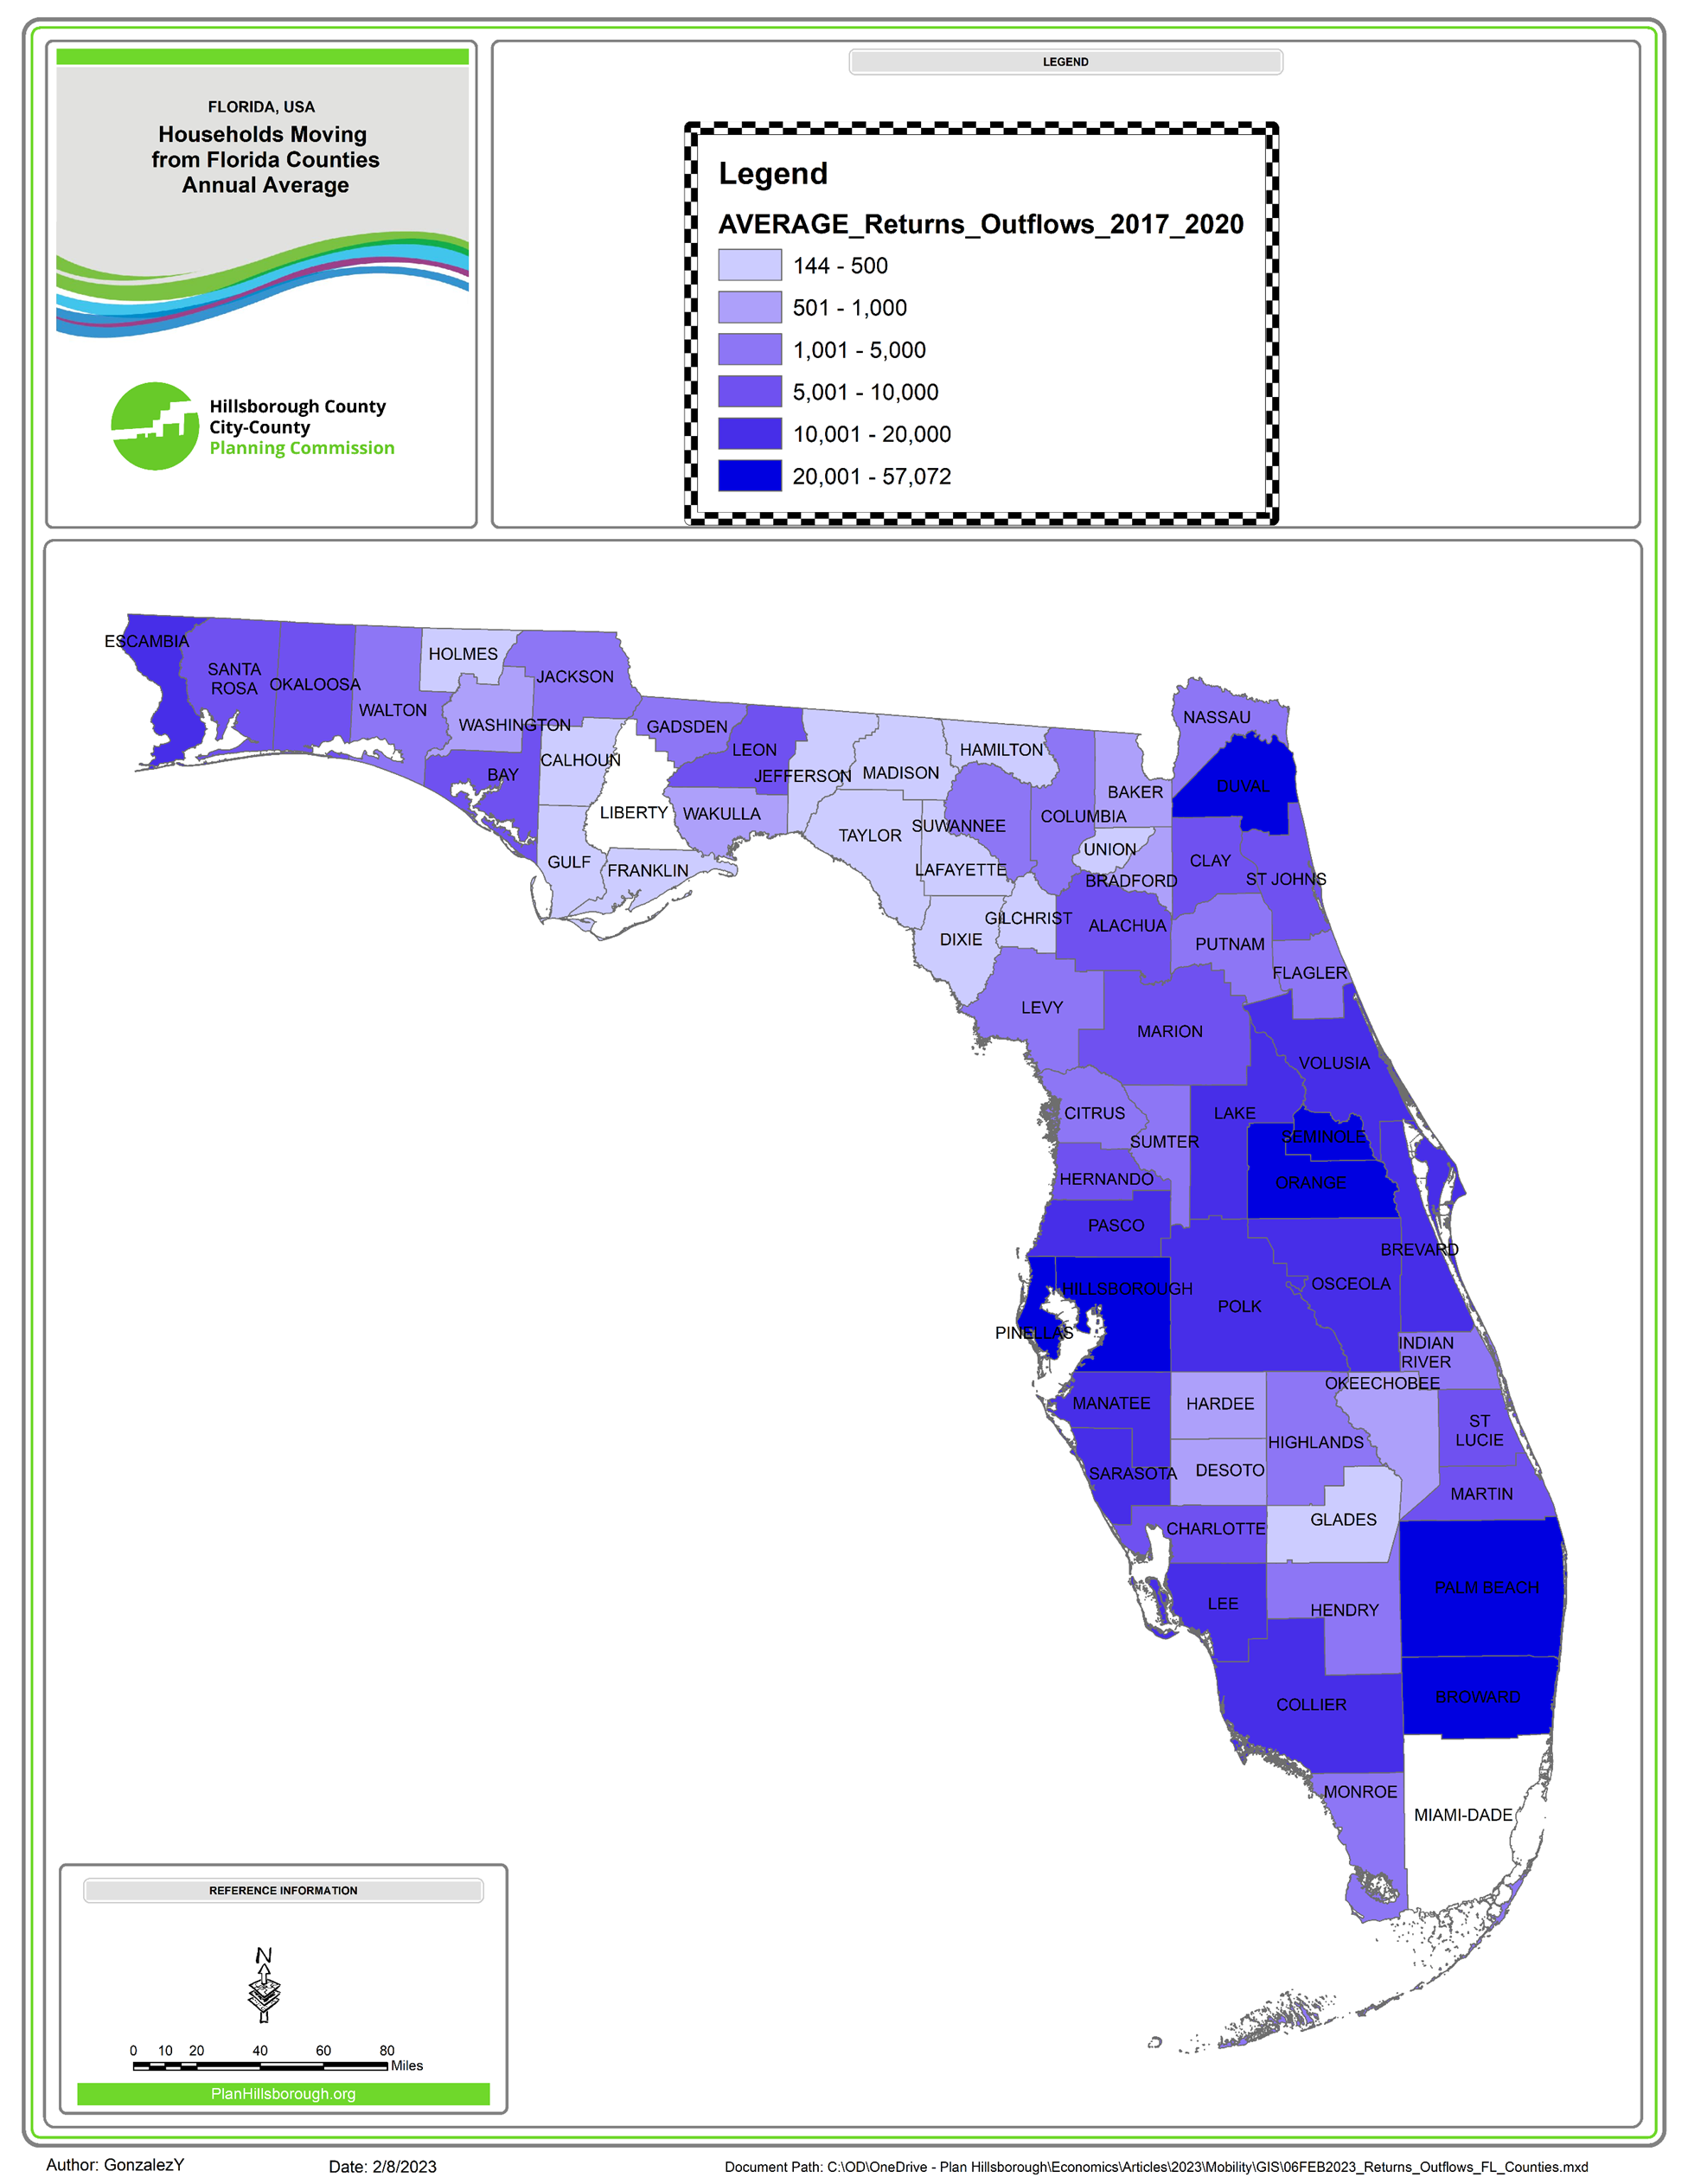 Map shows counties in Florida.  It also indicates how many households are leaving that county to move elsewhere.  Hillsborough and Pinellas Counties are losing over 20,000 households per year.